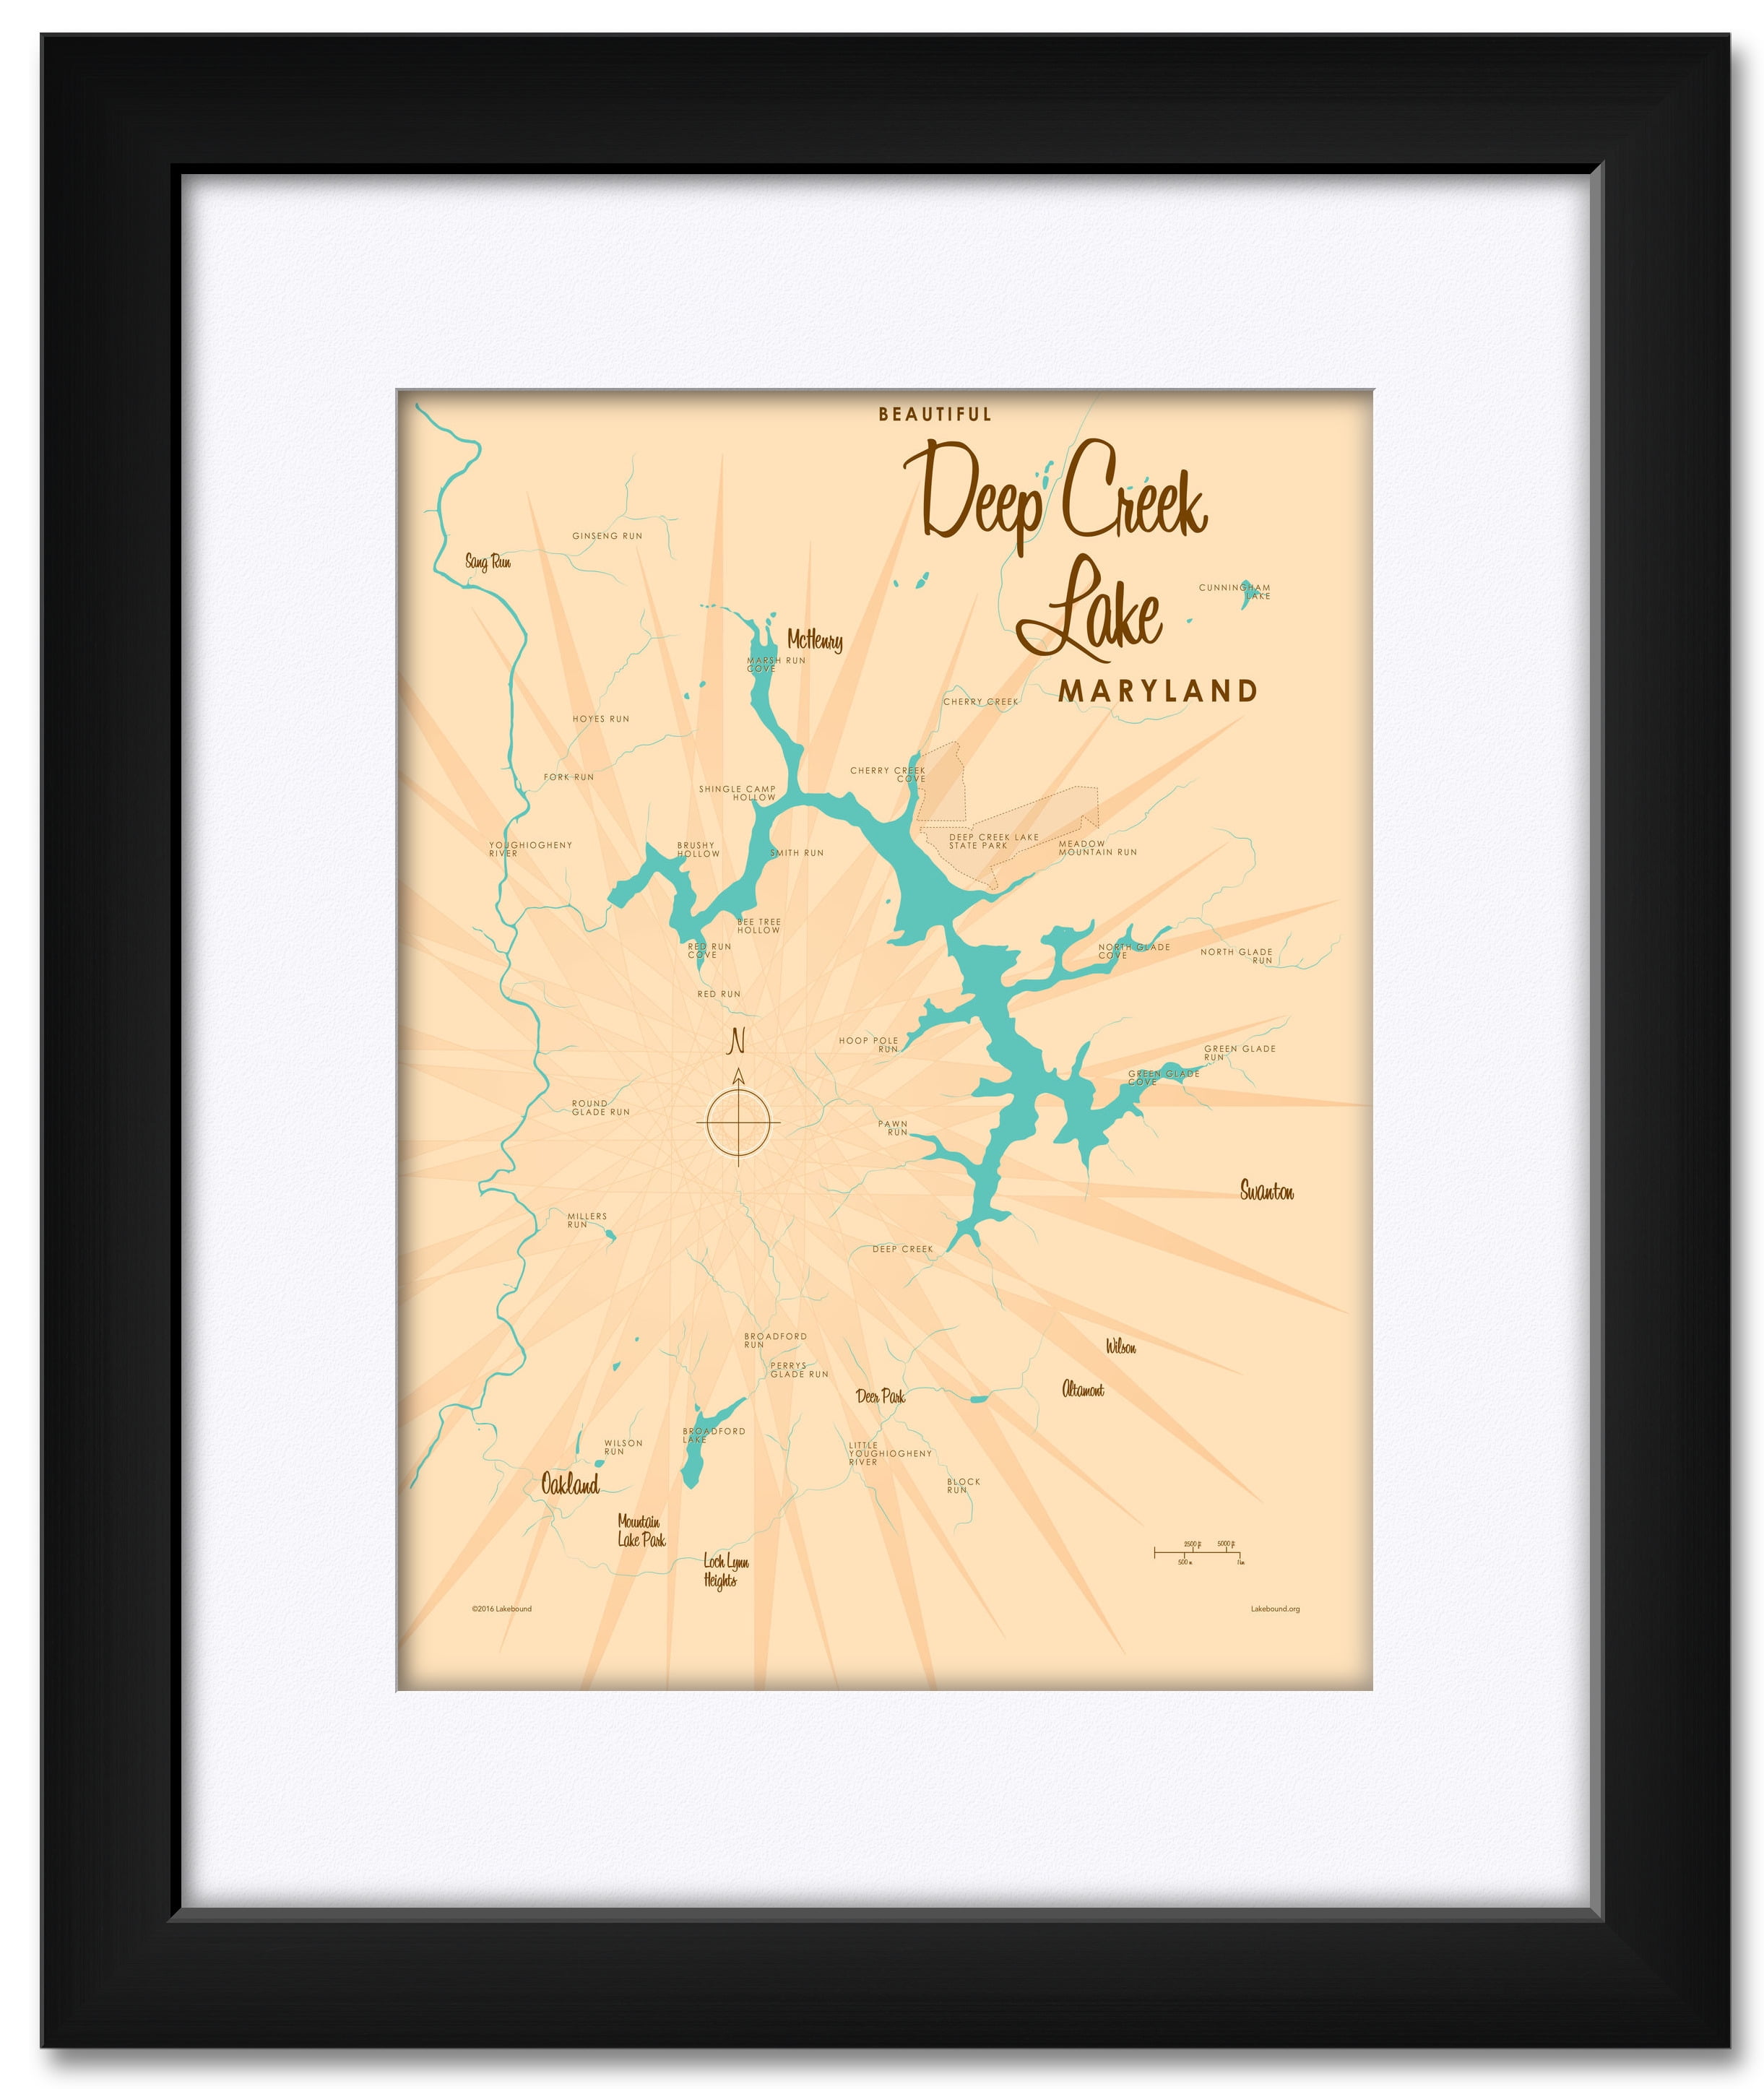 Deep Creek Lake Maryland Map Framed And Matted Art Print By Lakebound Print Size 9 X 12 0177